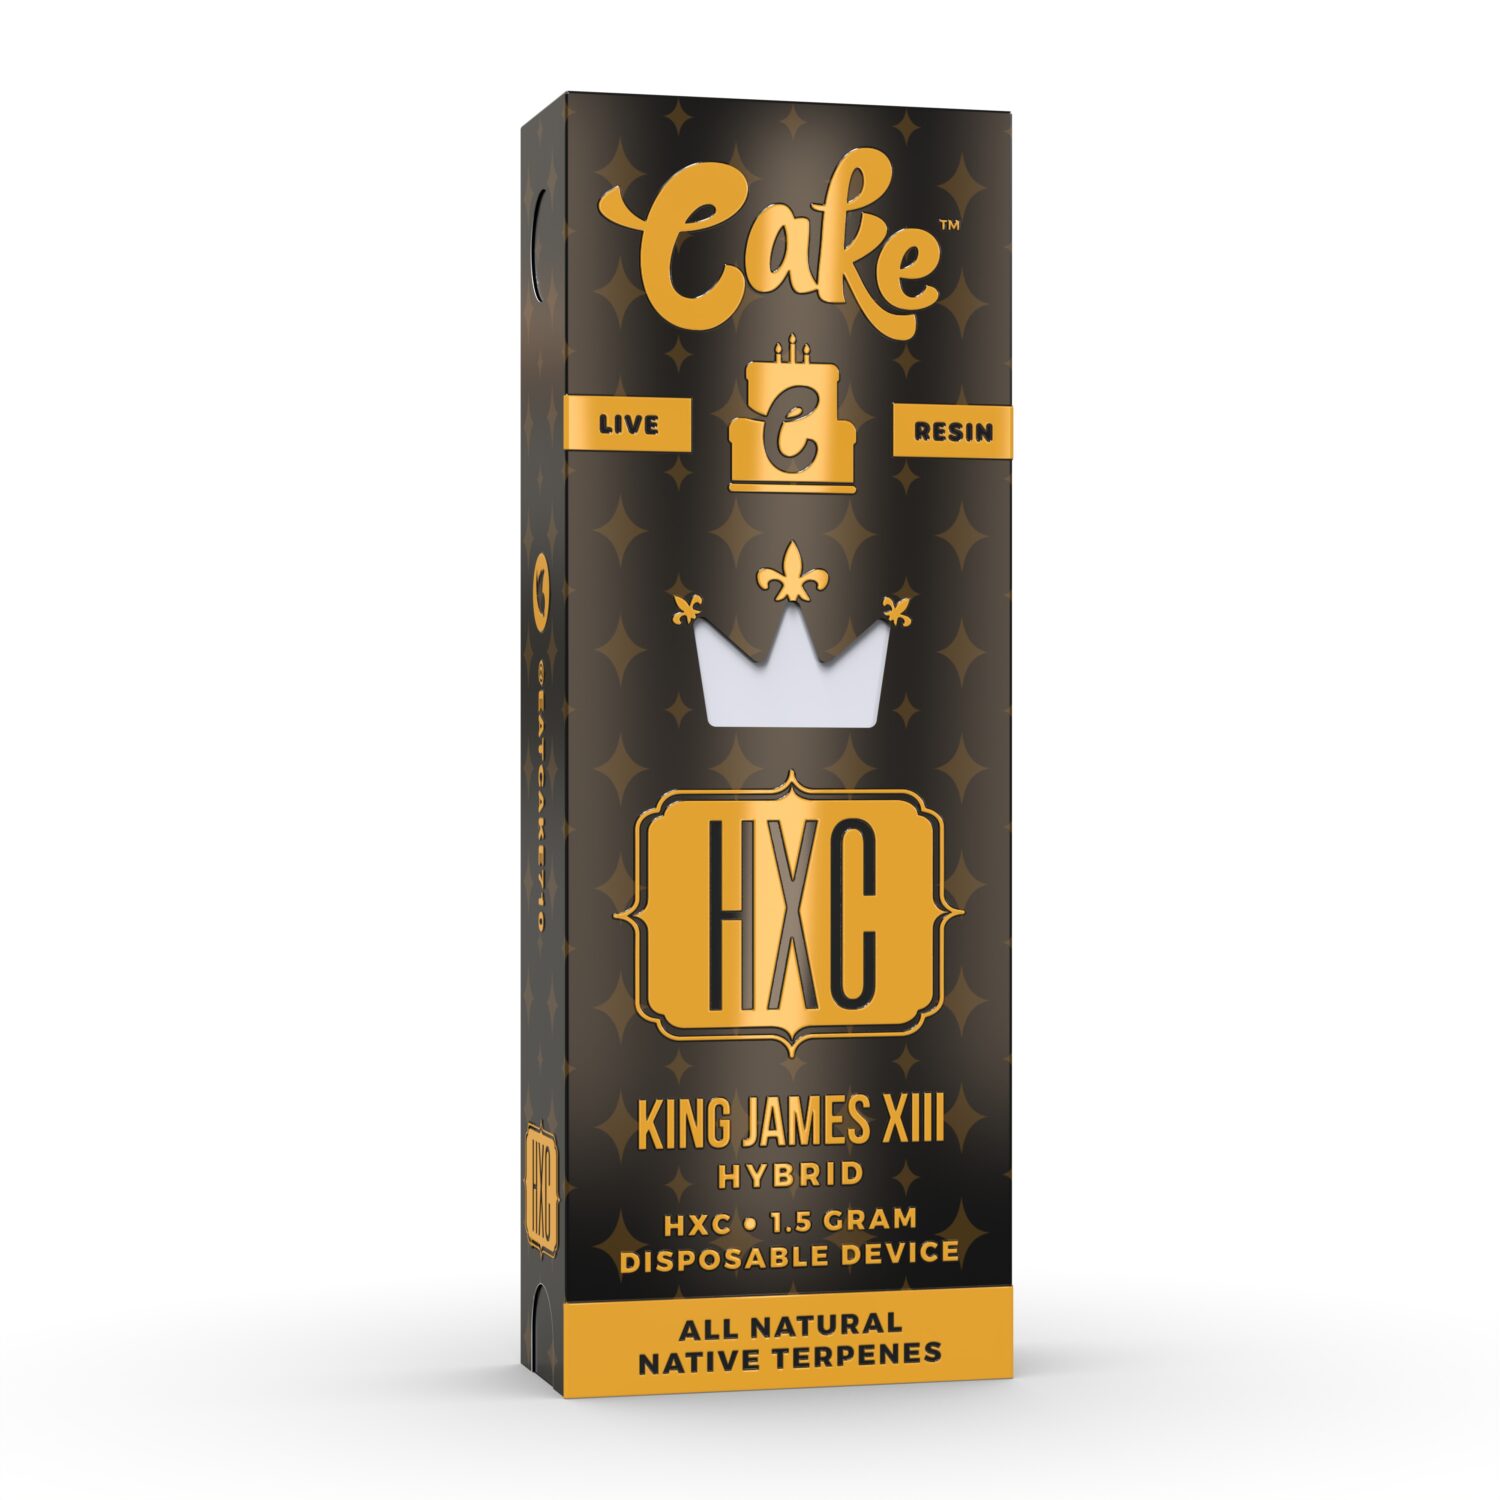 Cake-HXC-Live-Resin-Disposable-king-james-xiii-scaled-1.jpg